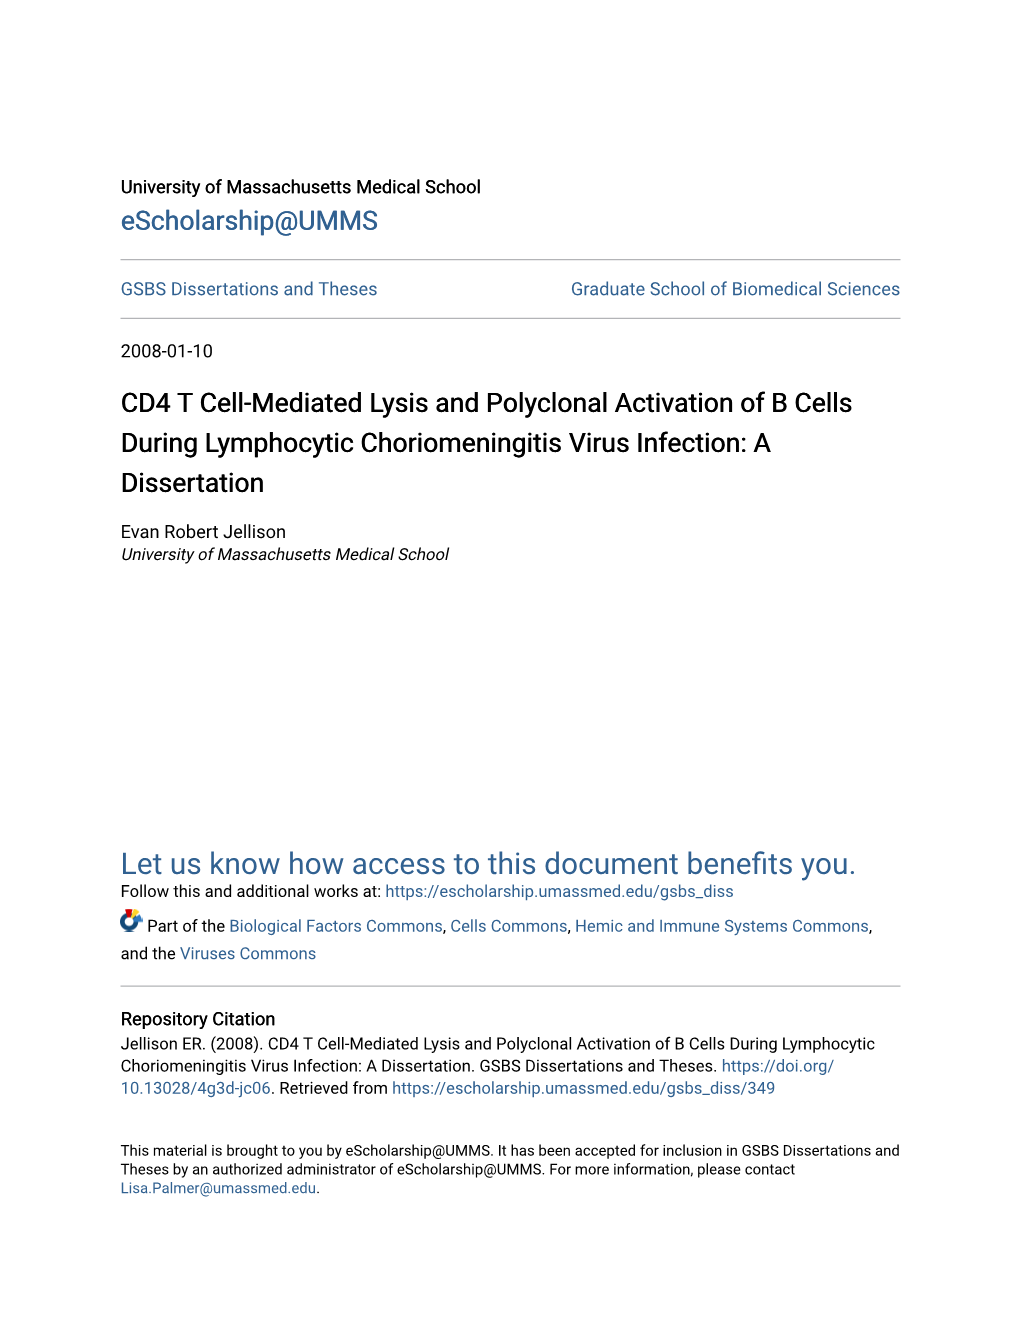 CD4 T Cell-Mediated Lysis and Polyclonal Activation of B Cells During Lymphocytic Choriomeningitis Virus Infection: a Dissertation